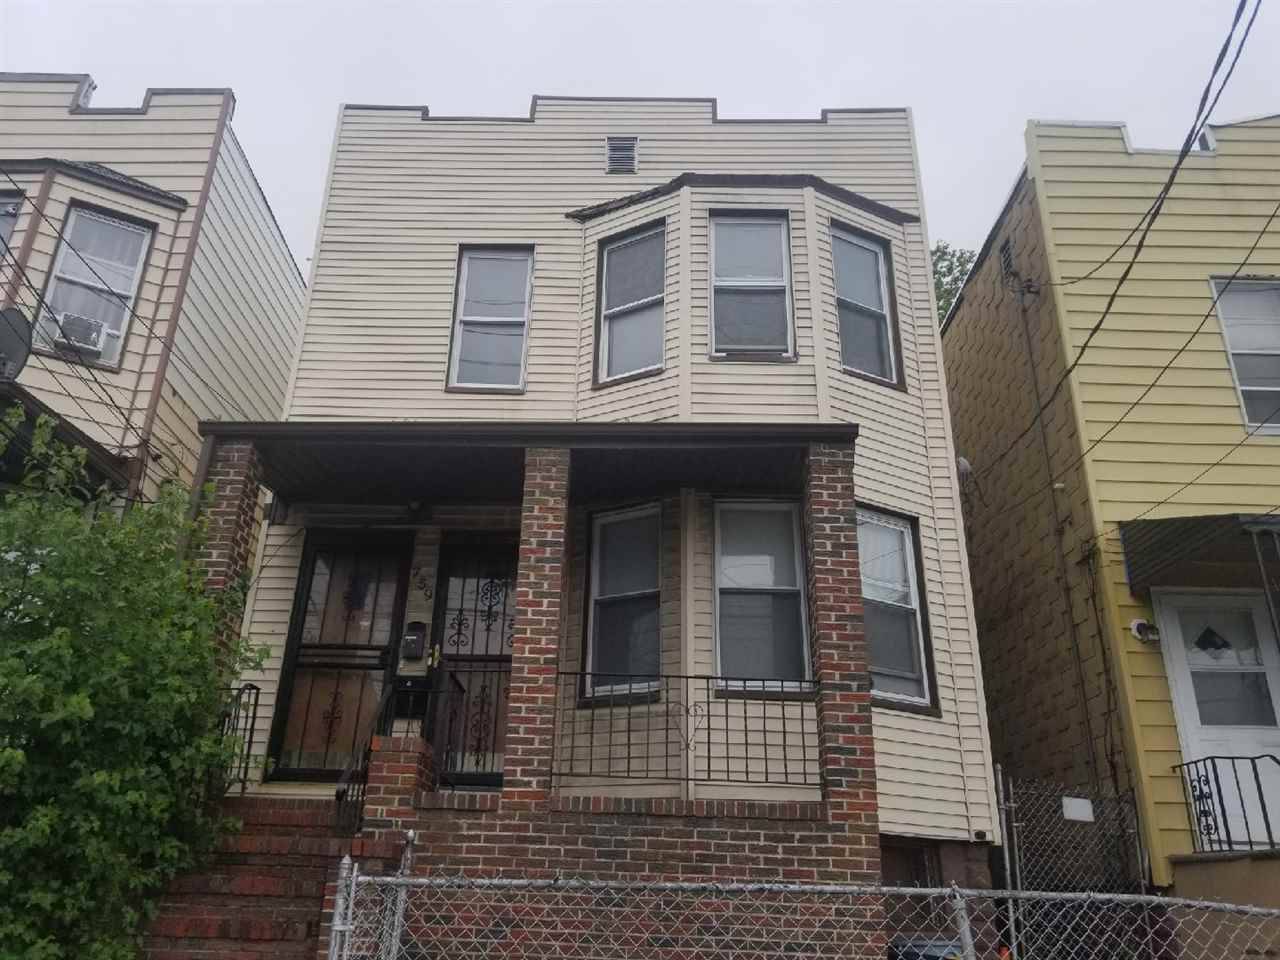 Two Family home - 3 BR New Jersey